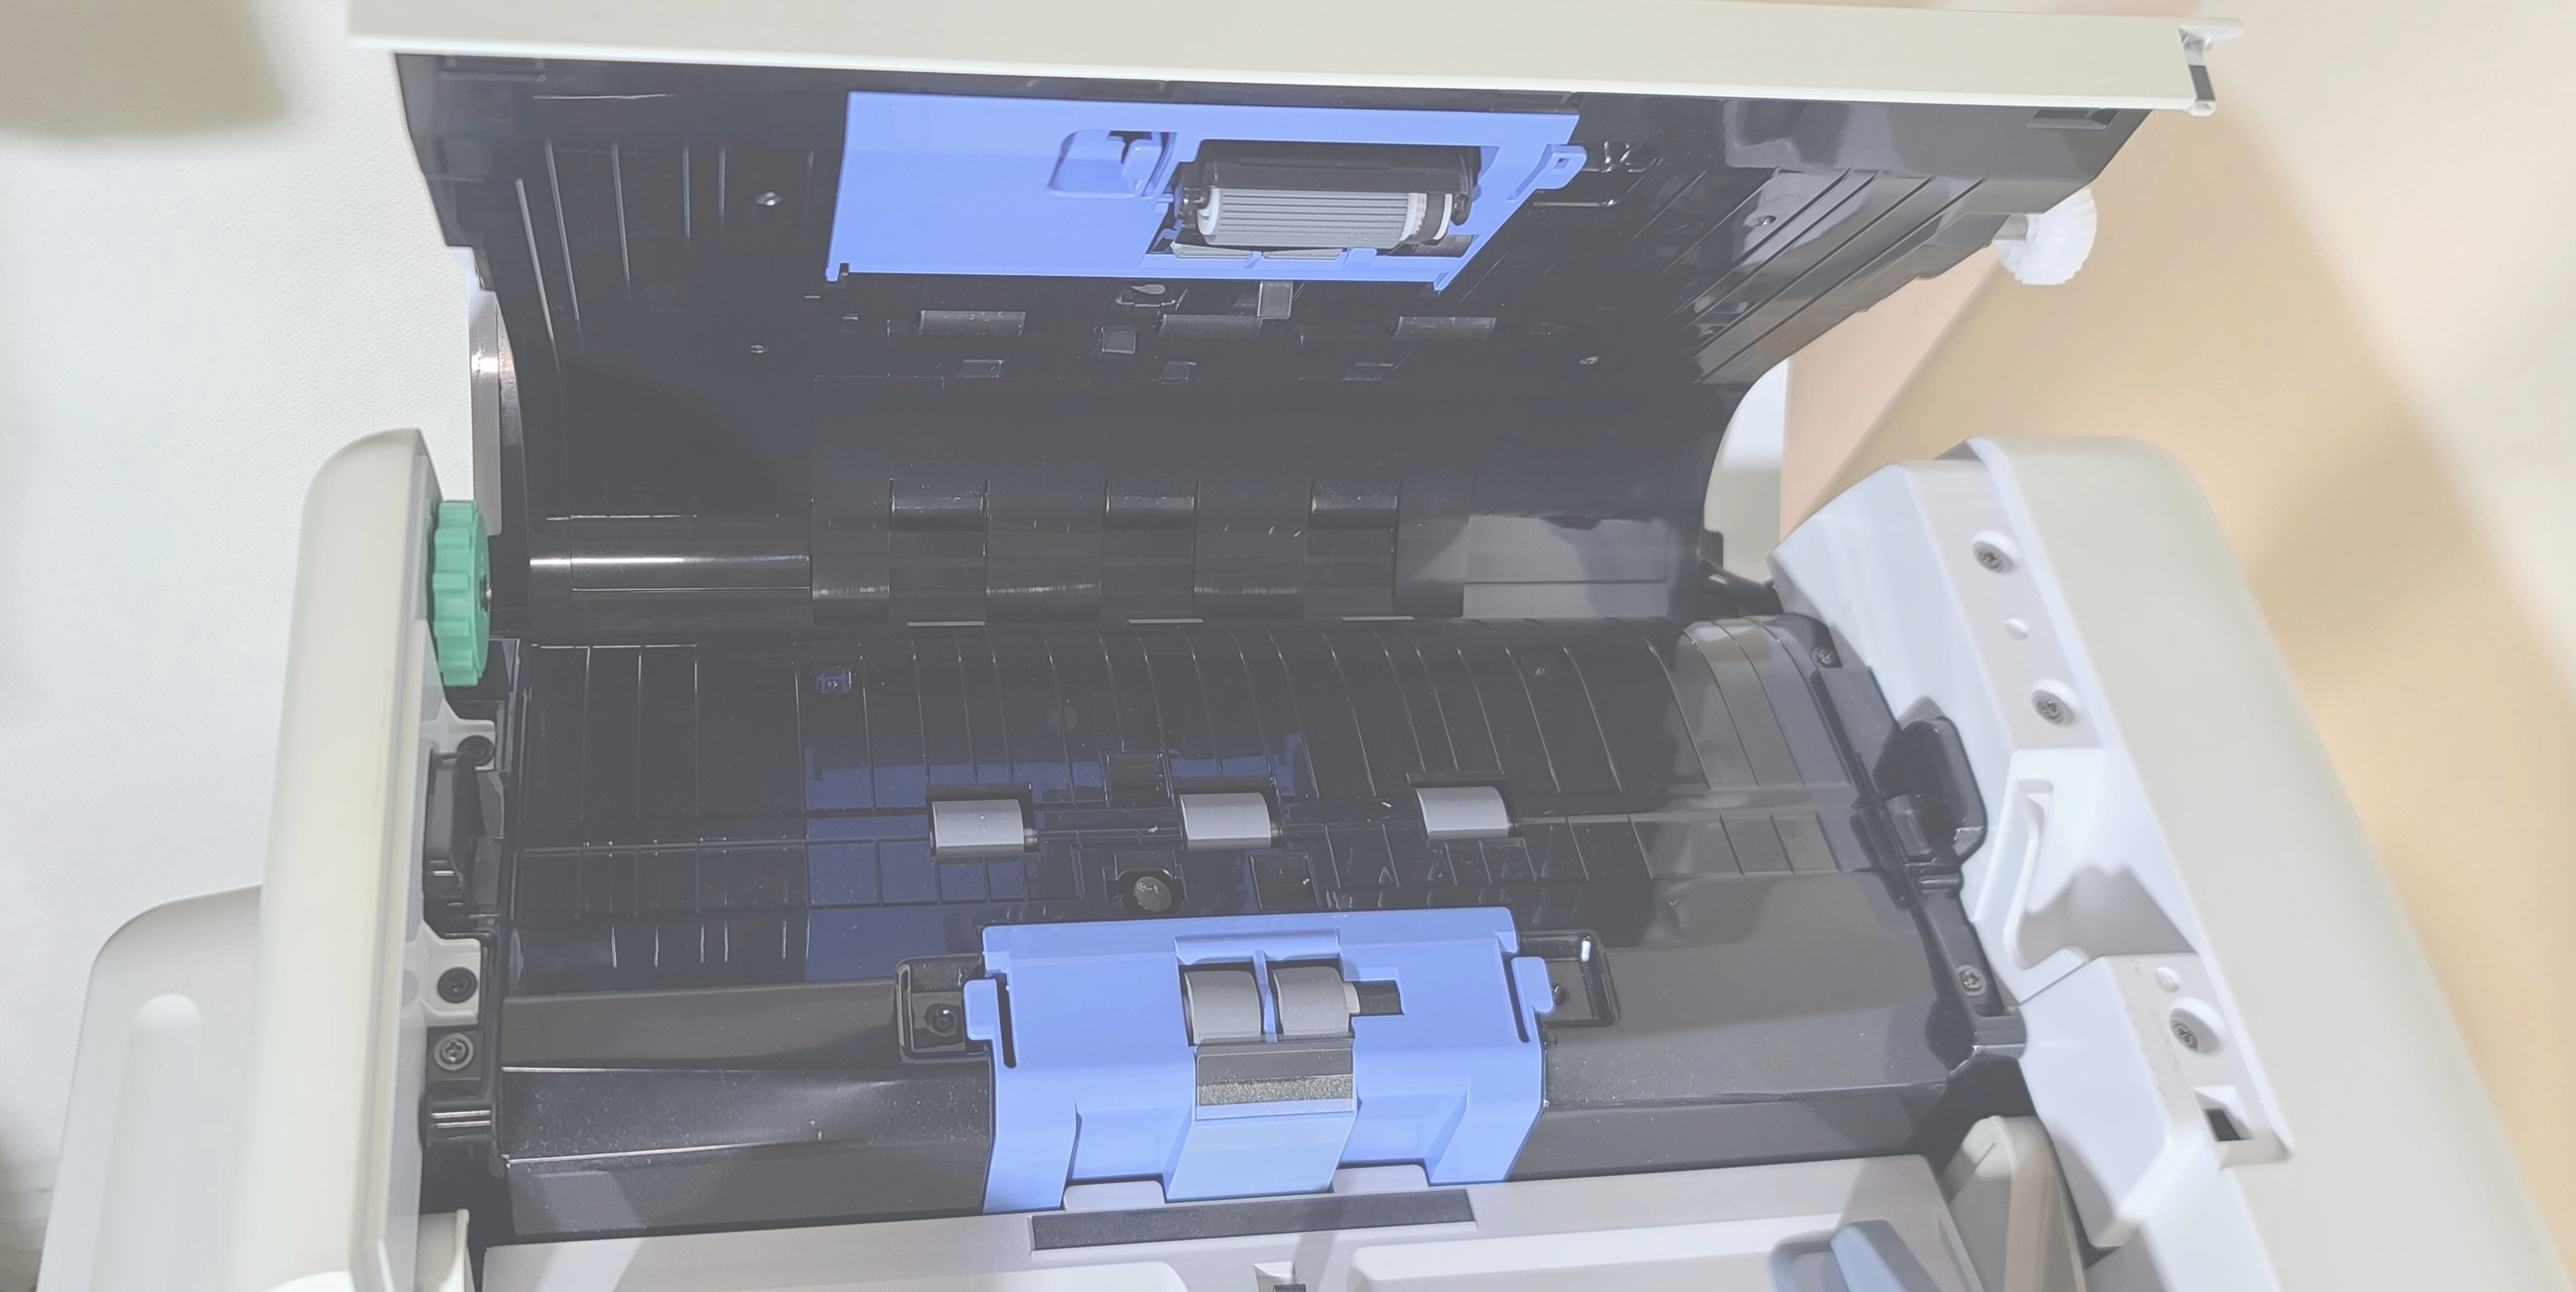 [ Saitama departure ][EPSON]A3 document scanner DS-60000 * network panel installing * counter 5166 sheets * operation verification settled * (9-4206)